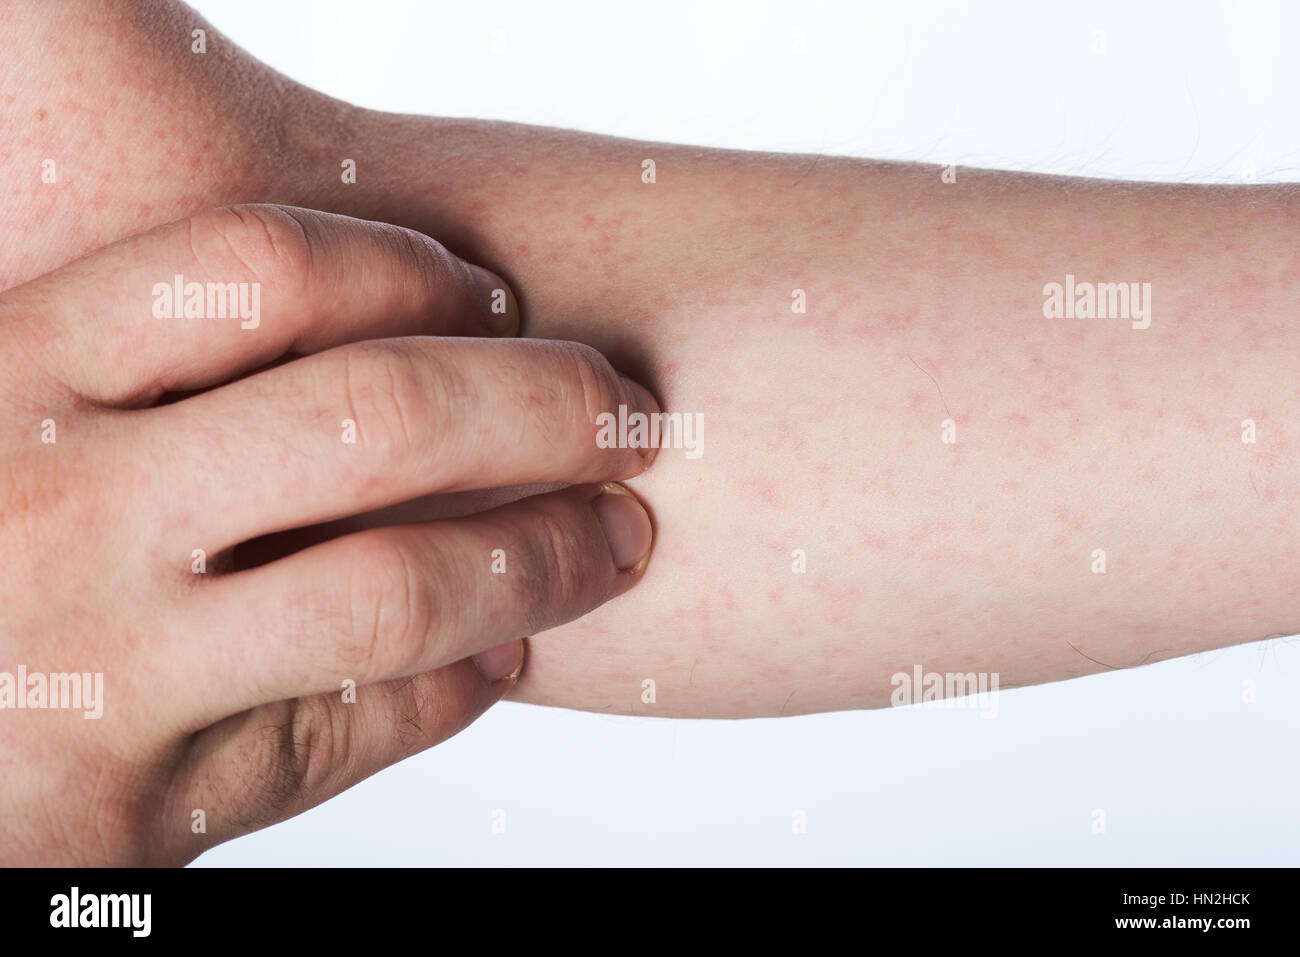 close up of hand with rash isolated on white Stock Photo